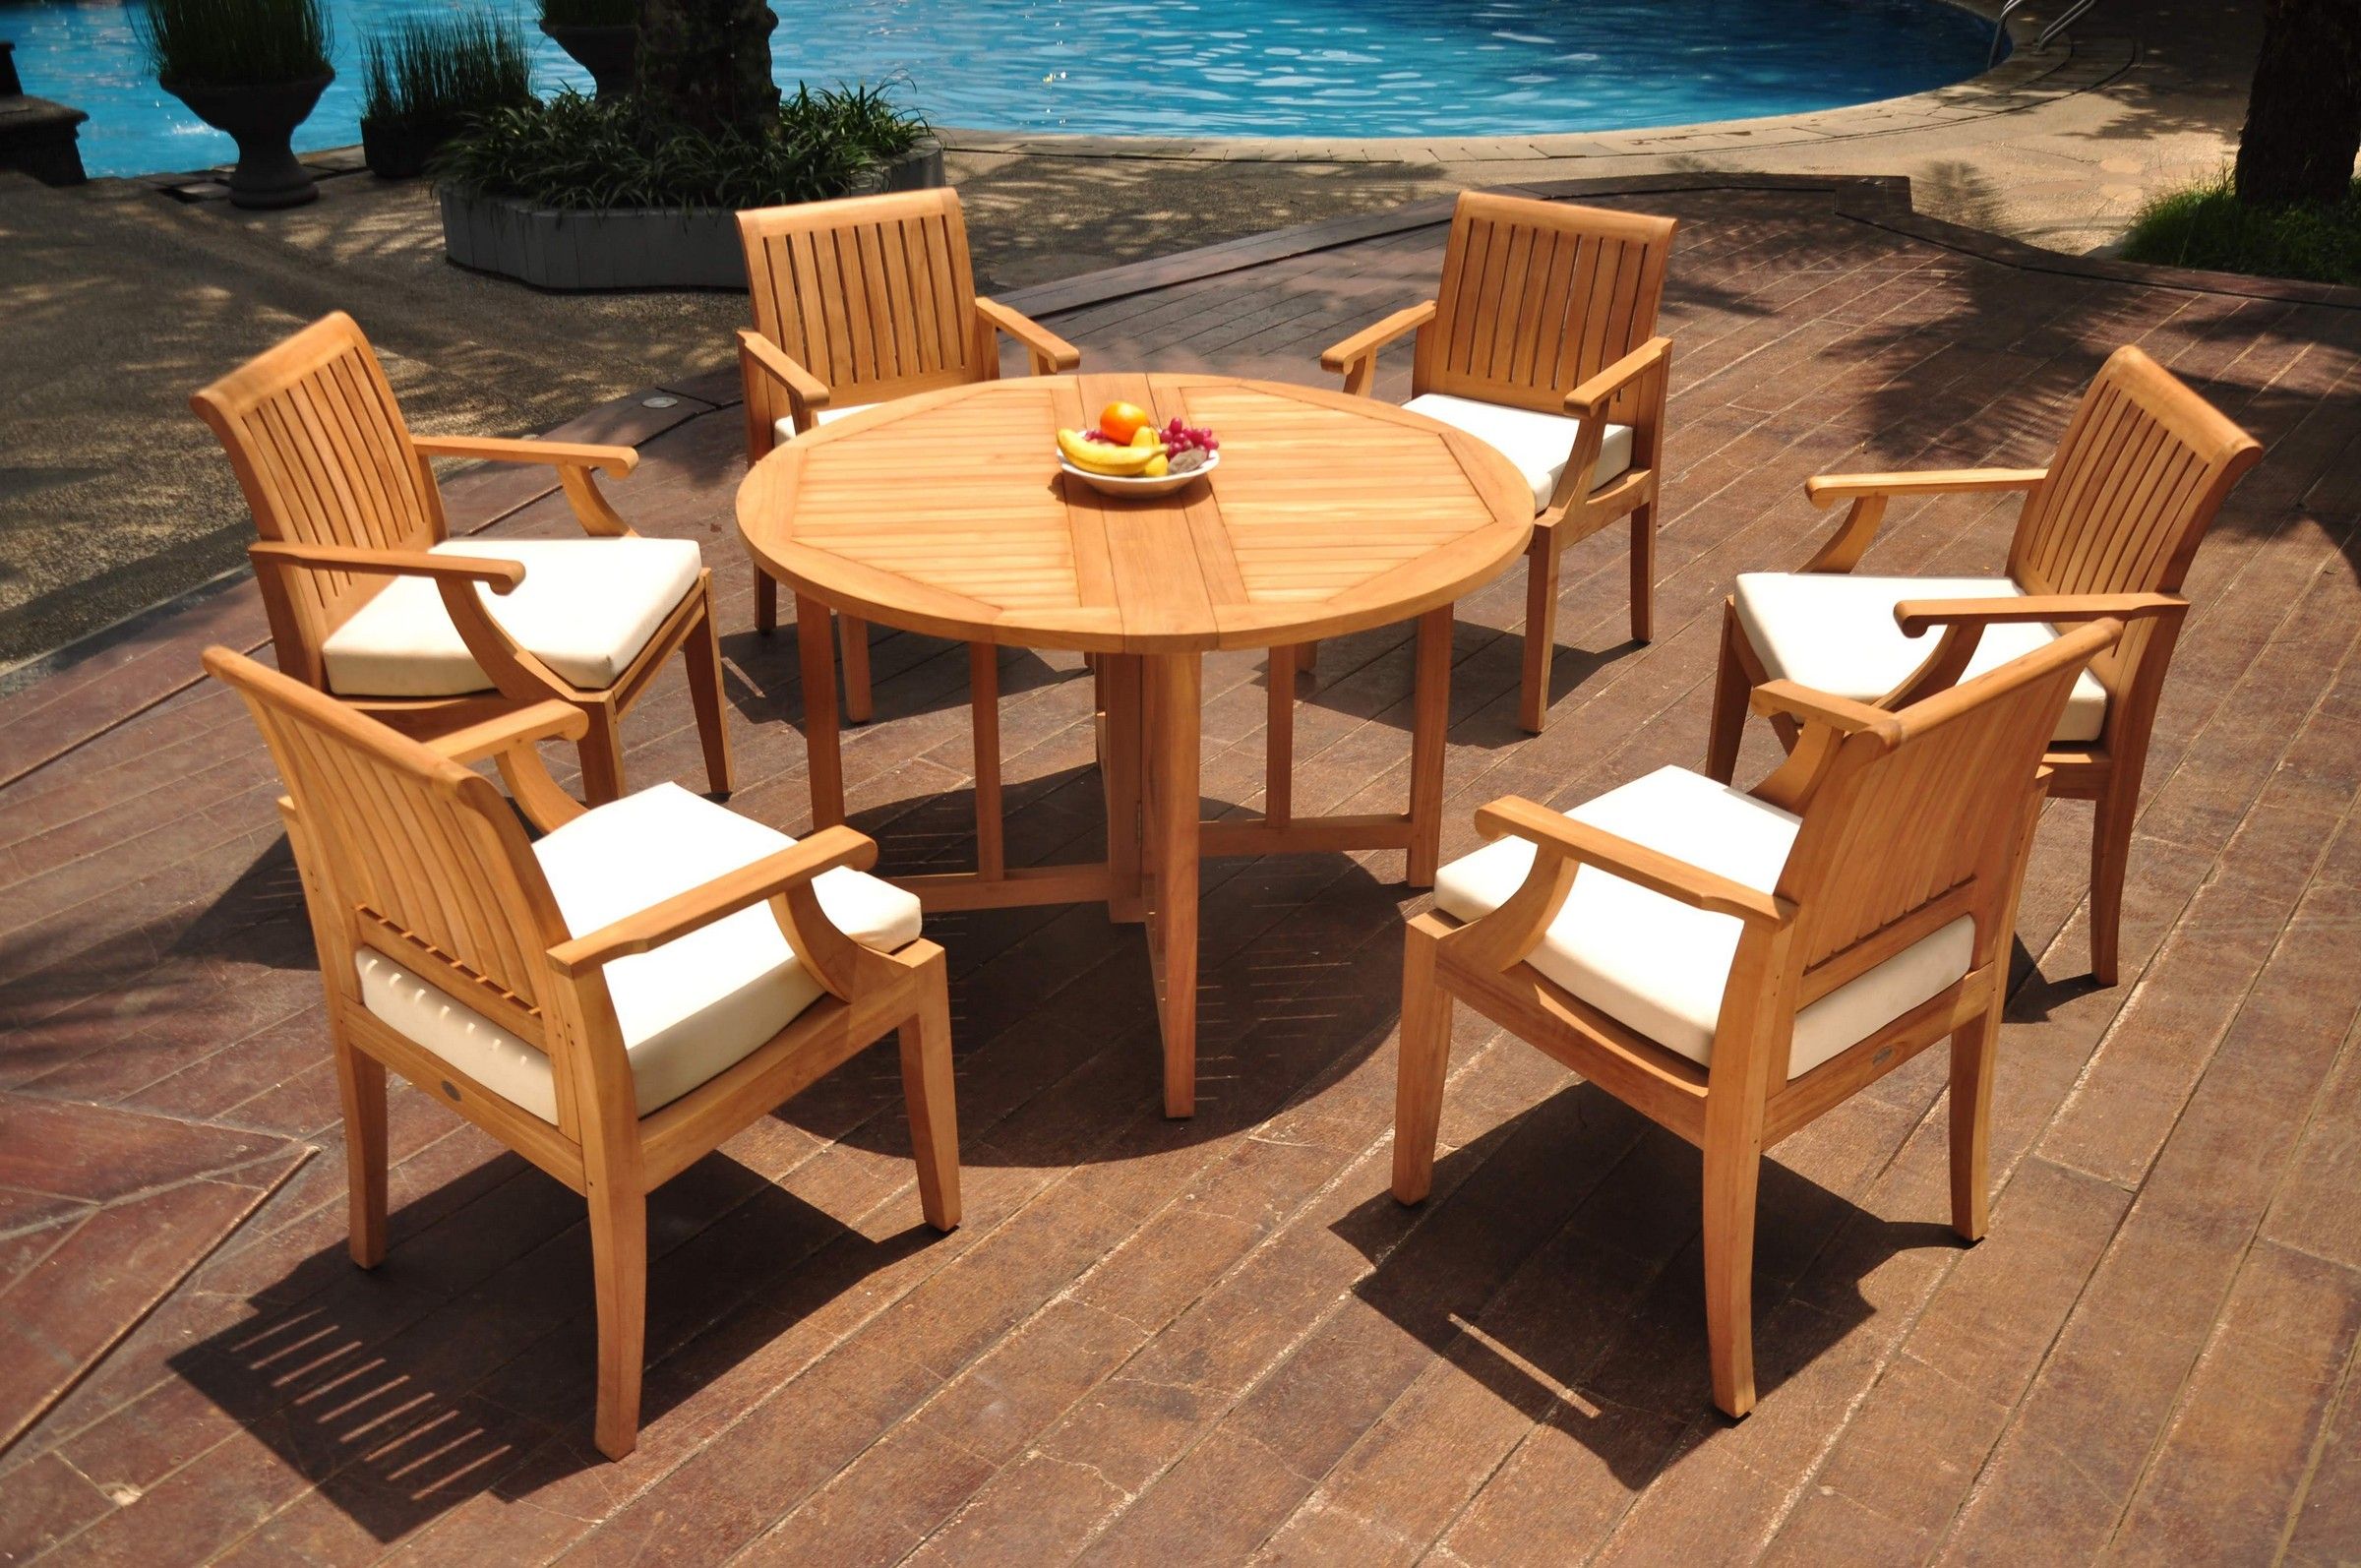 Grade A Teak Dining Set: 6 Seater 7 Pc: 48" Round Butterfly Table And 6 Regarding Teak Wood Outdoor Table And Chairs Sets (View 7 of 15)